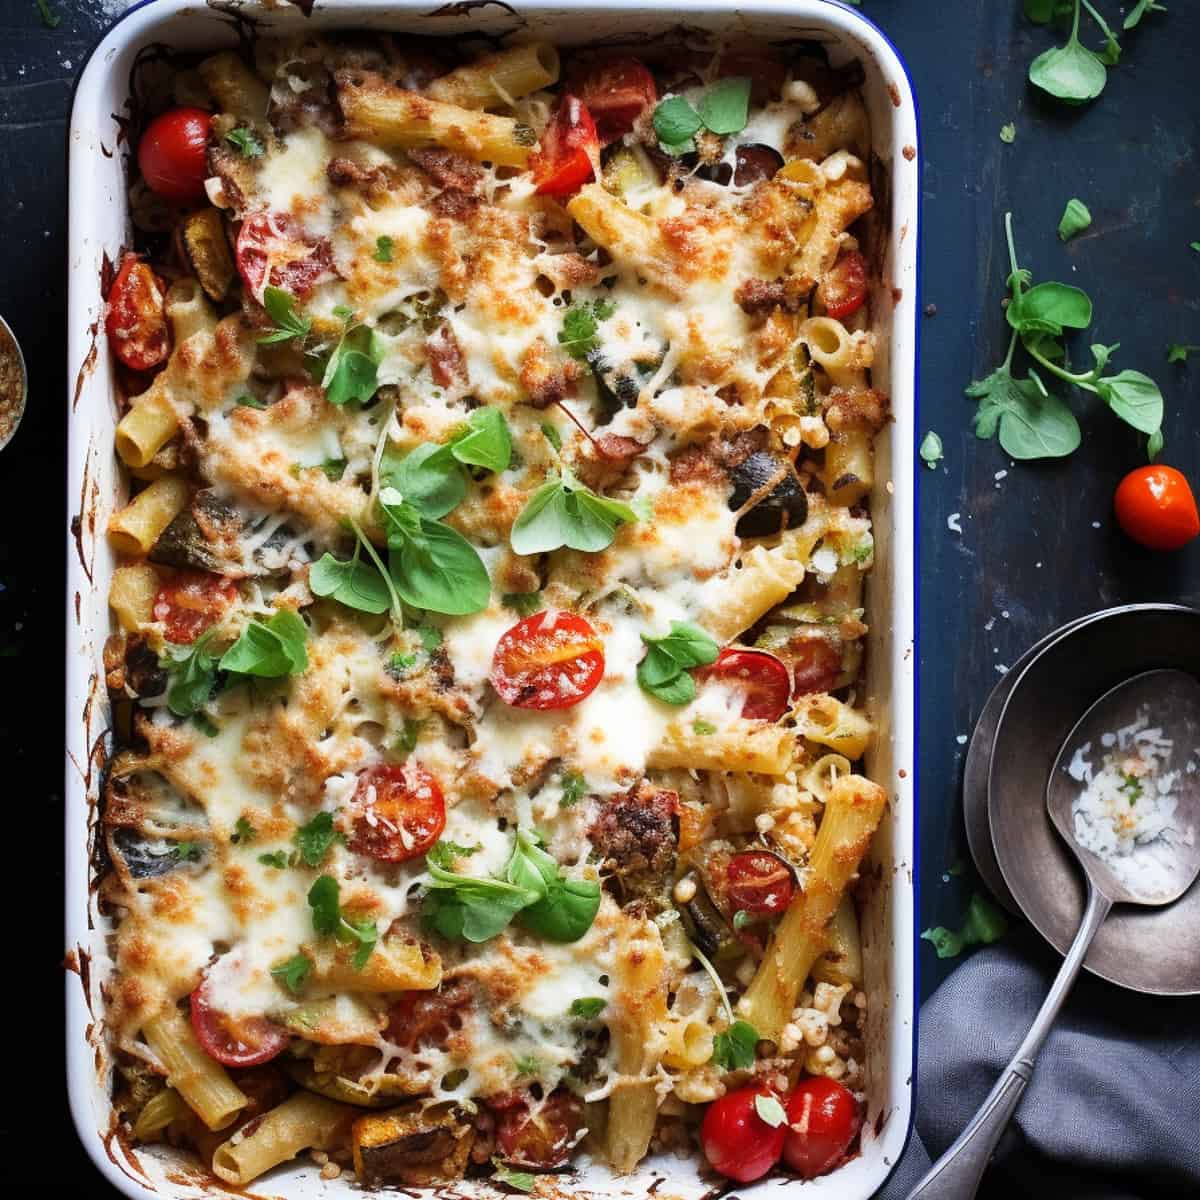 Vegetable pasta bake with tomatoes and cheese.